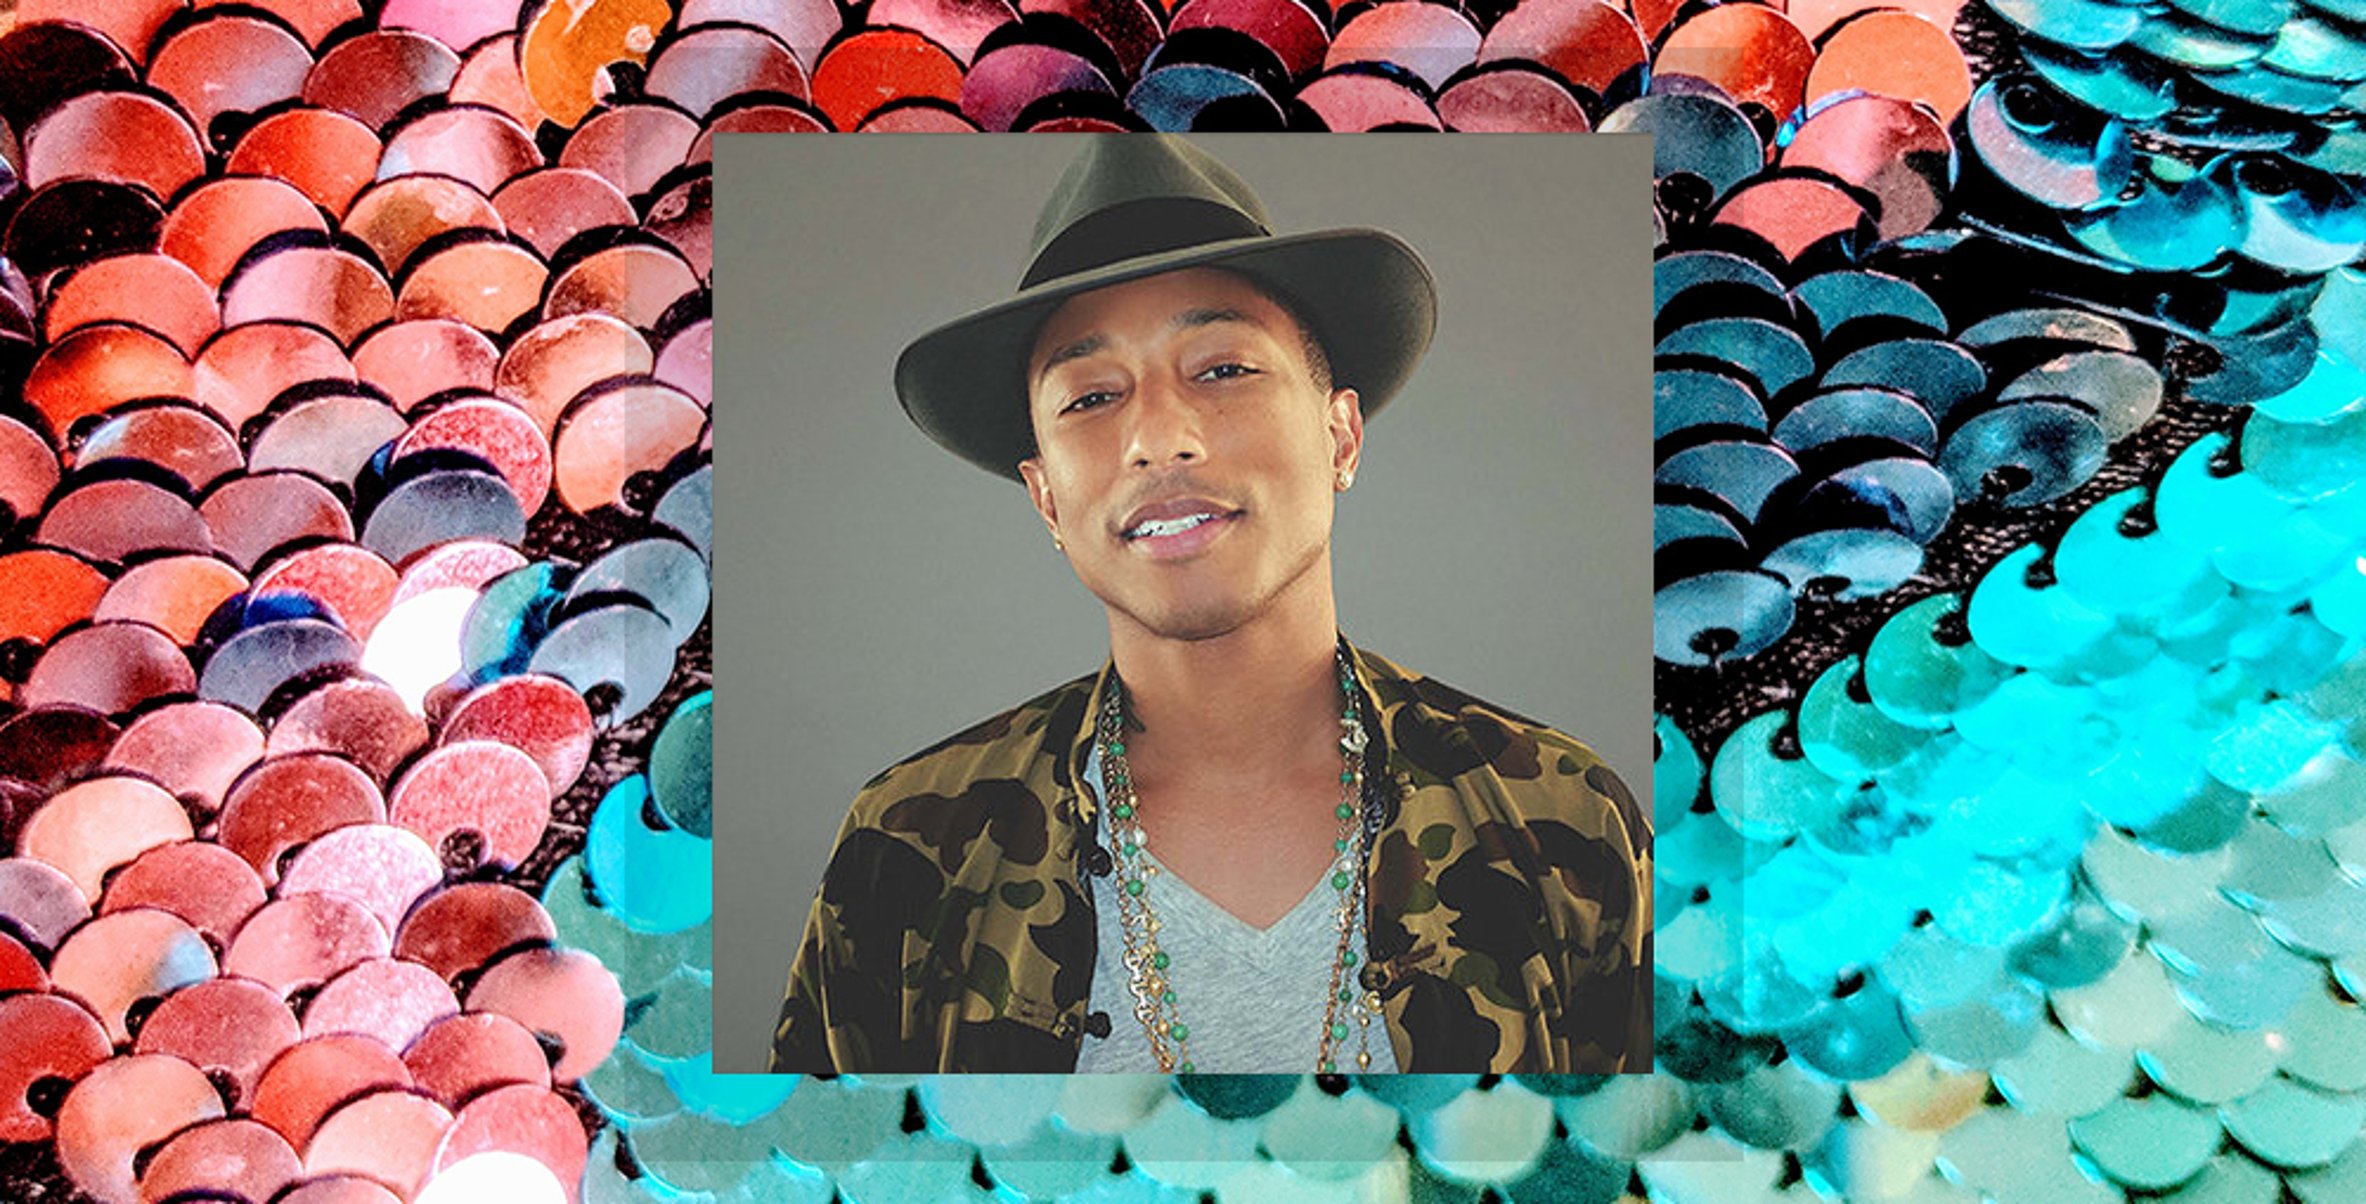 Happy Birthday Pharrell! He can do it all, here's some of his biggest Billboard Hits!